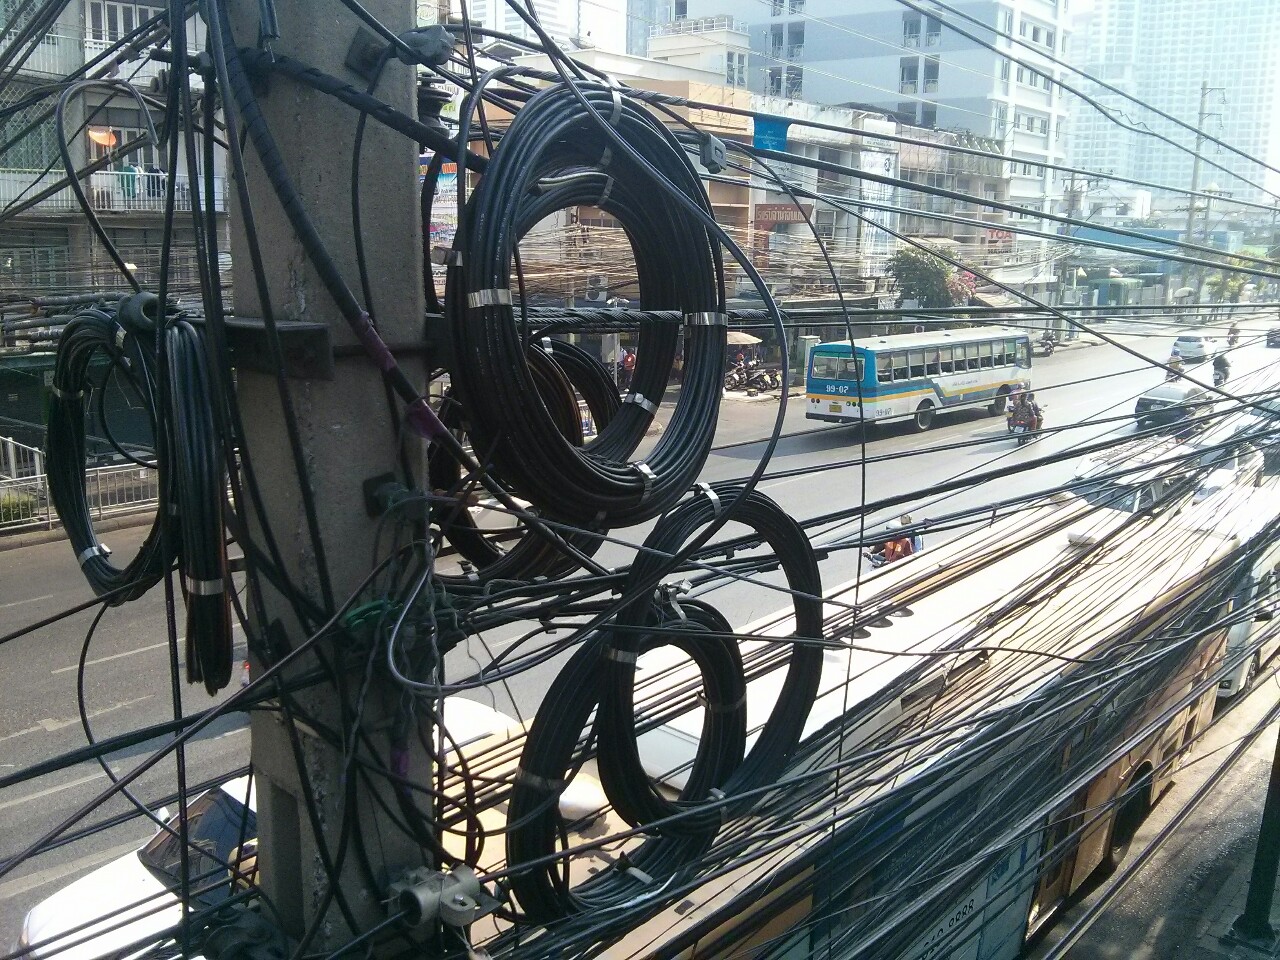 tabled mass of cabling in a Bangkok street